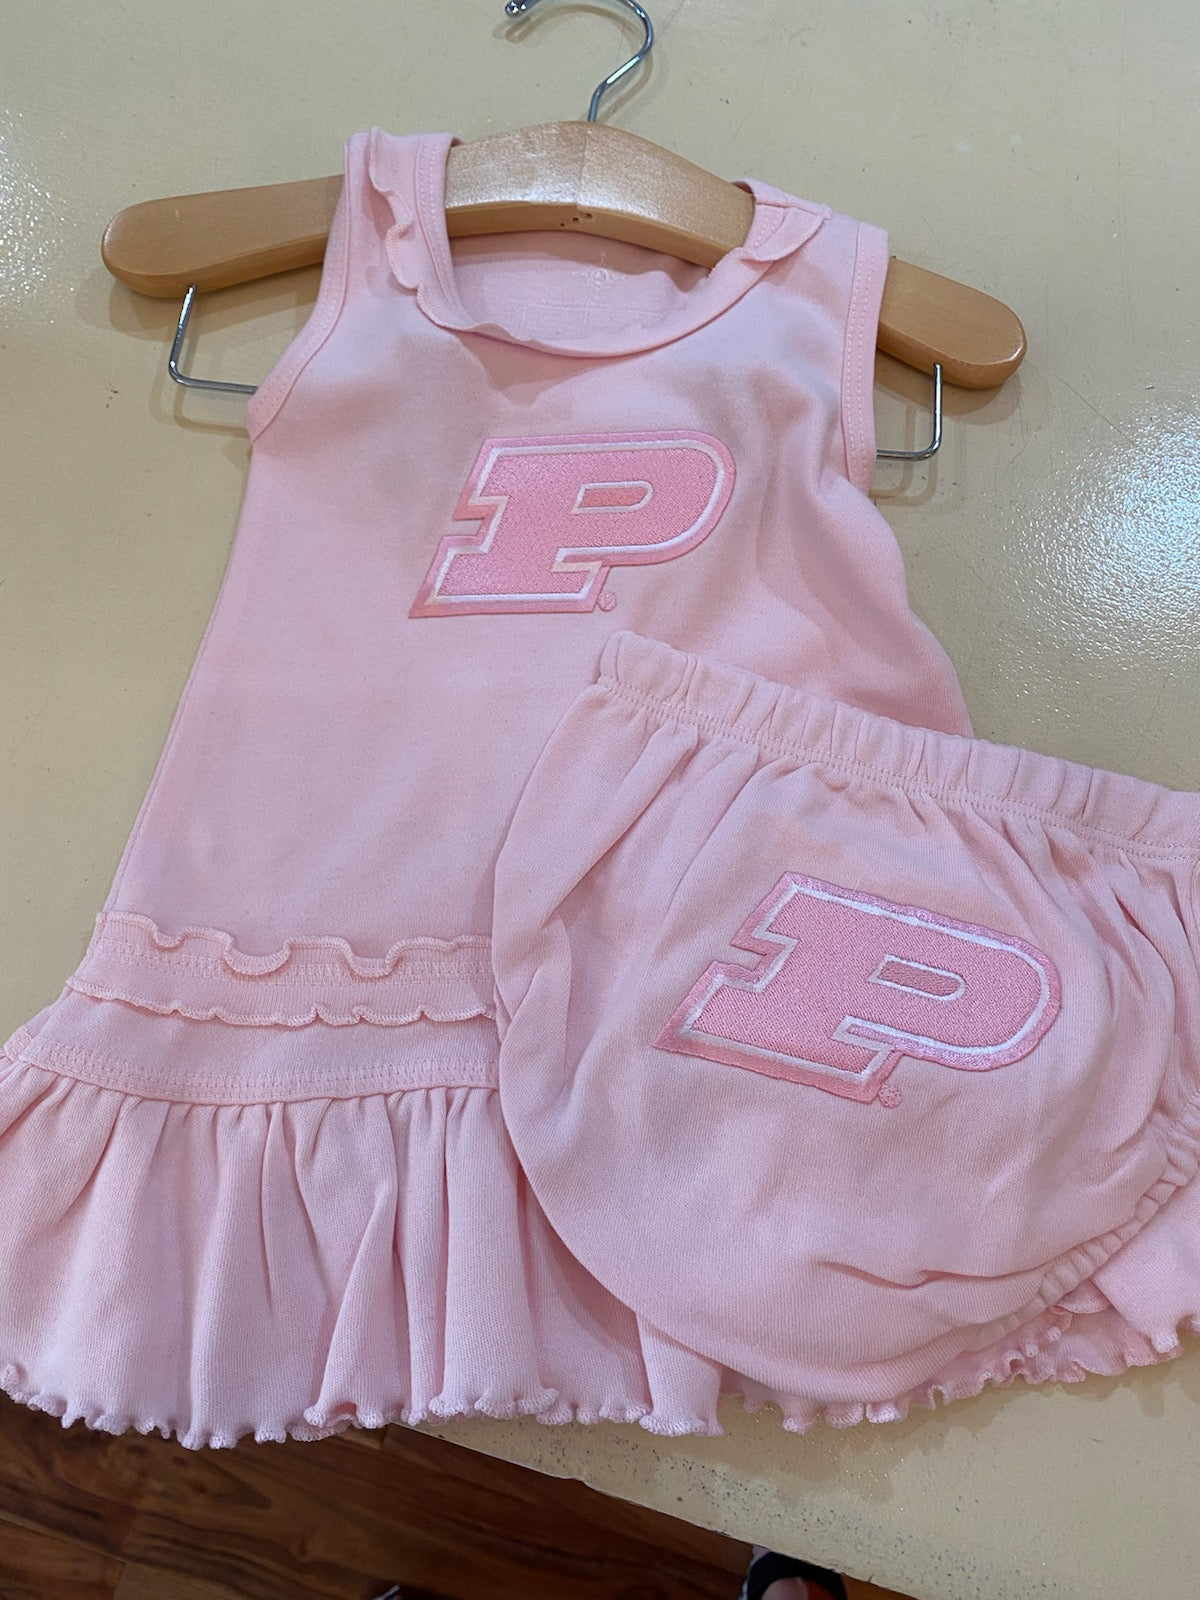 Purdue  Pink Body Ruffle Dress with Diaper cover